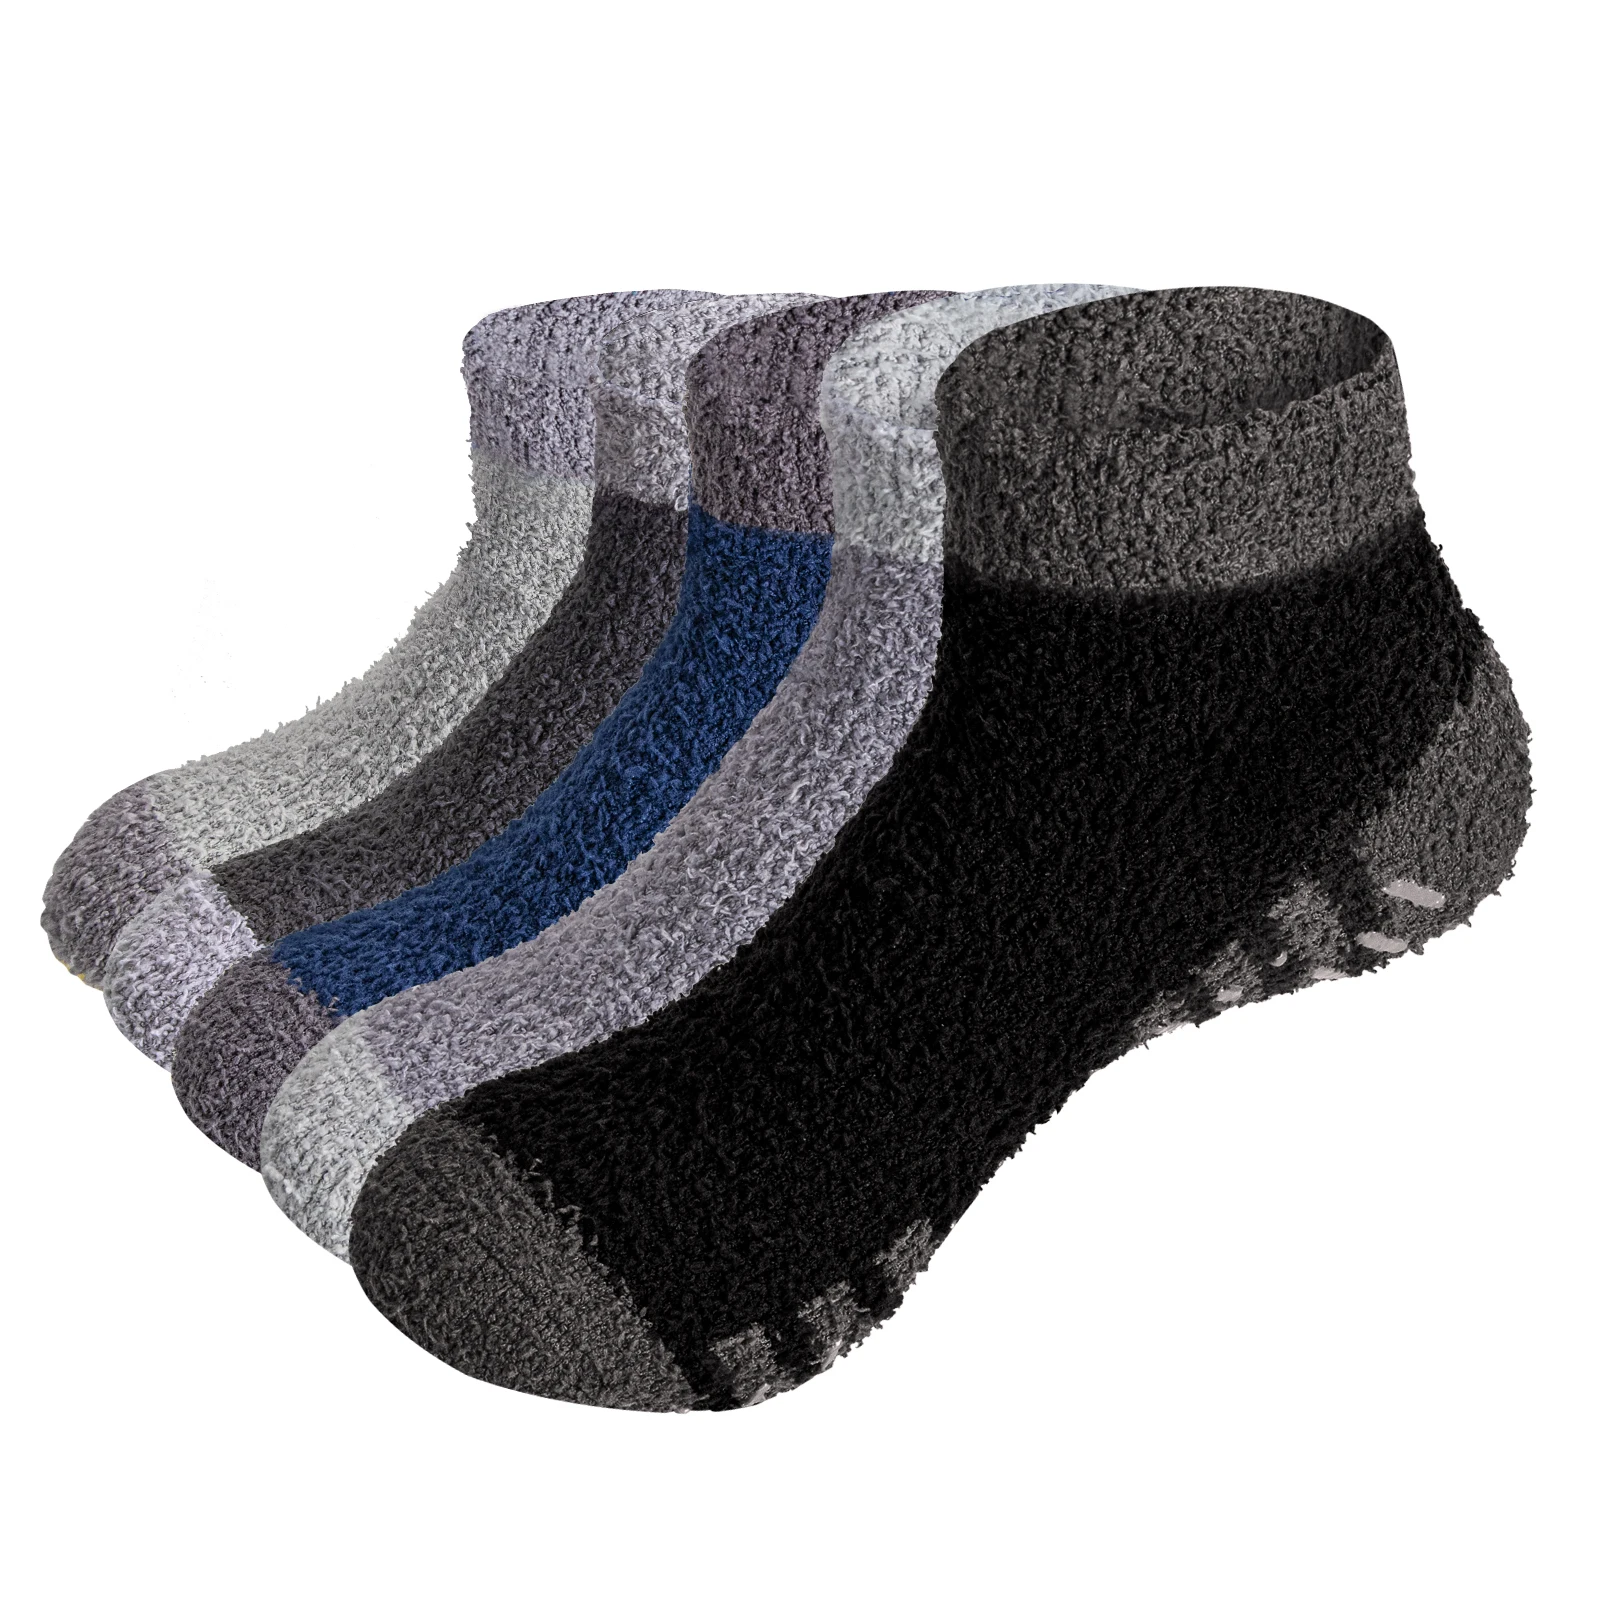 YUEDGE Men's Non Slip Fuzzy Fluffy Slipper Socks Cozy Winter Warm House Socks With Grips for Males Size 36-44